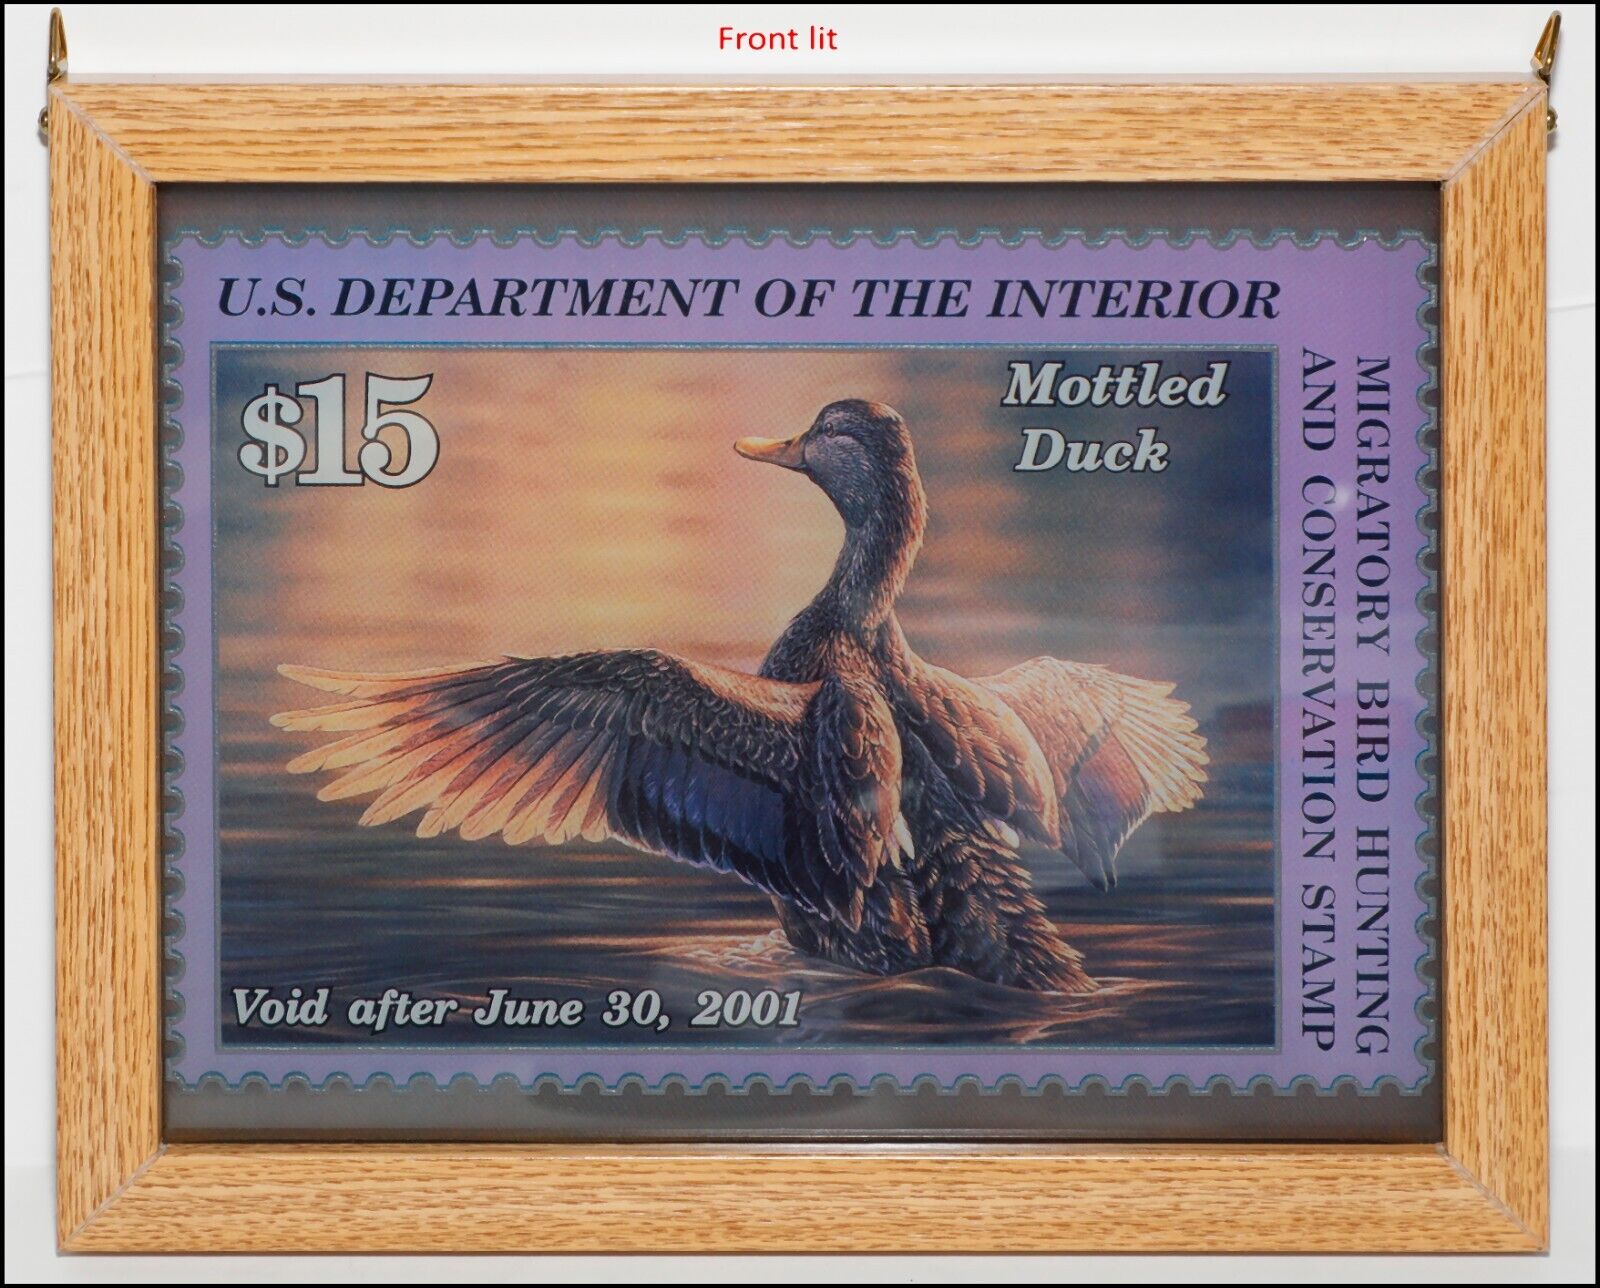 Glass suncatcher of Mottled Duck Migratory Bird Hunting and Conservation Stamp